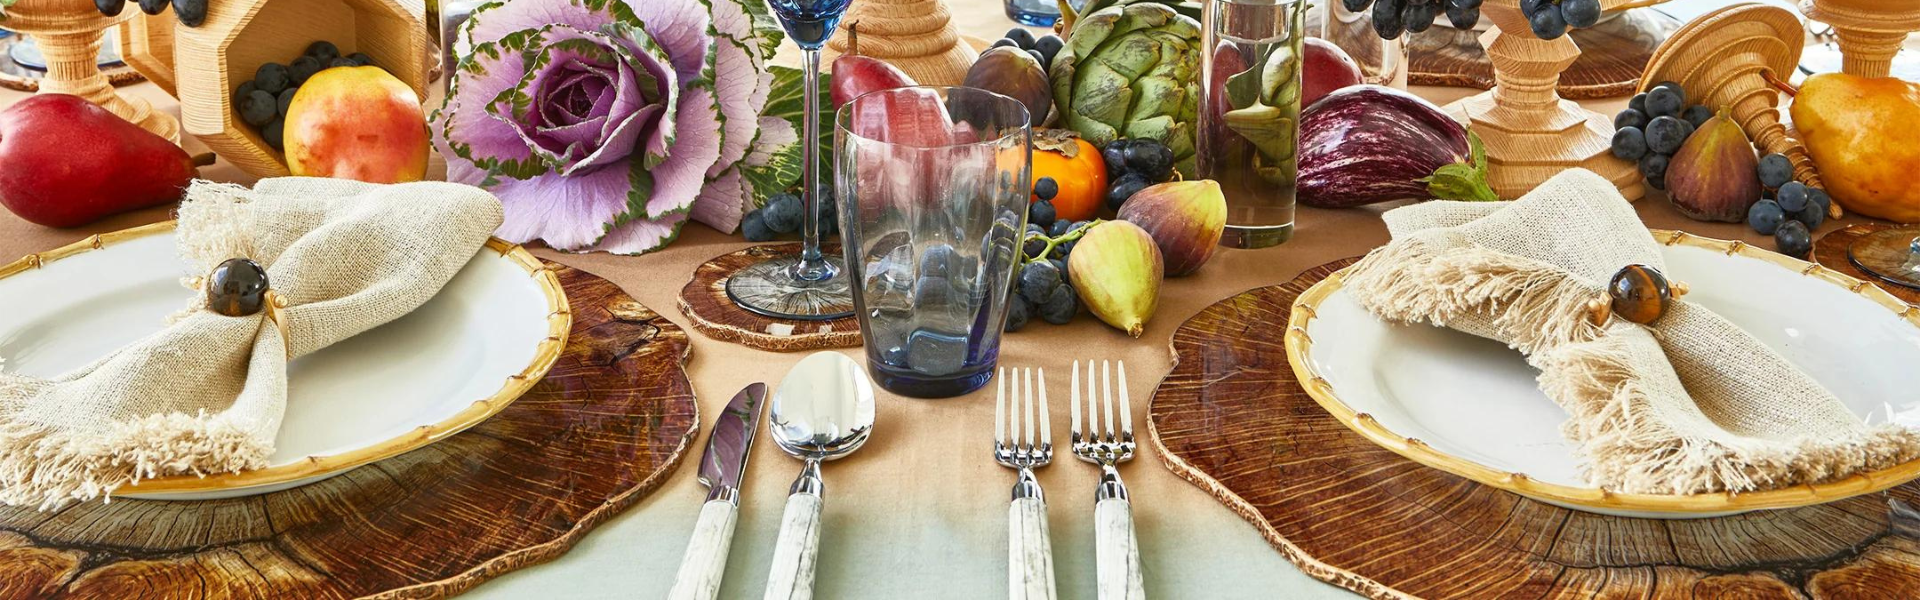 Rustic Chic Look for Thanksgiving